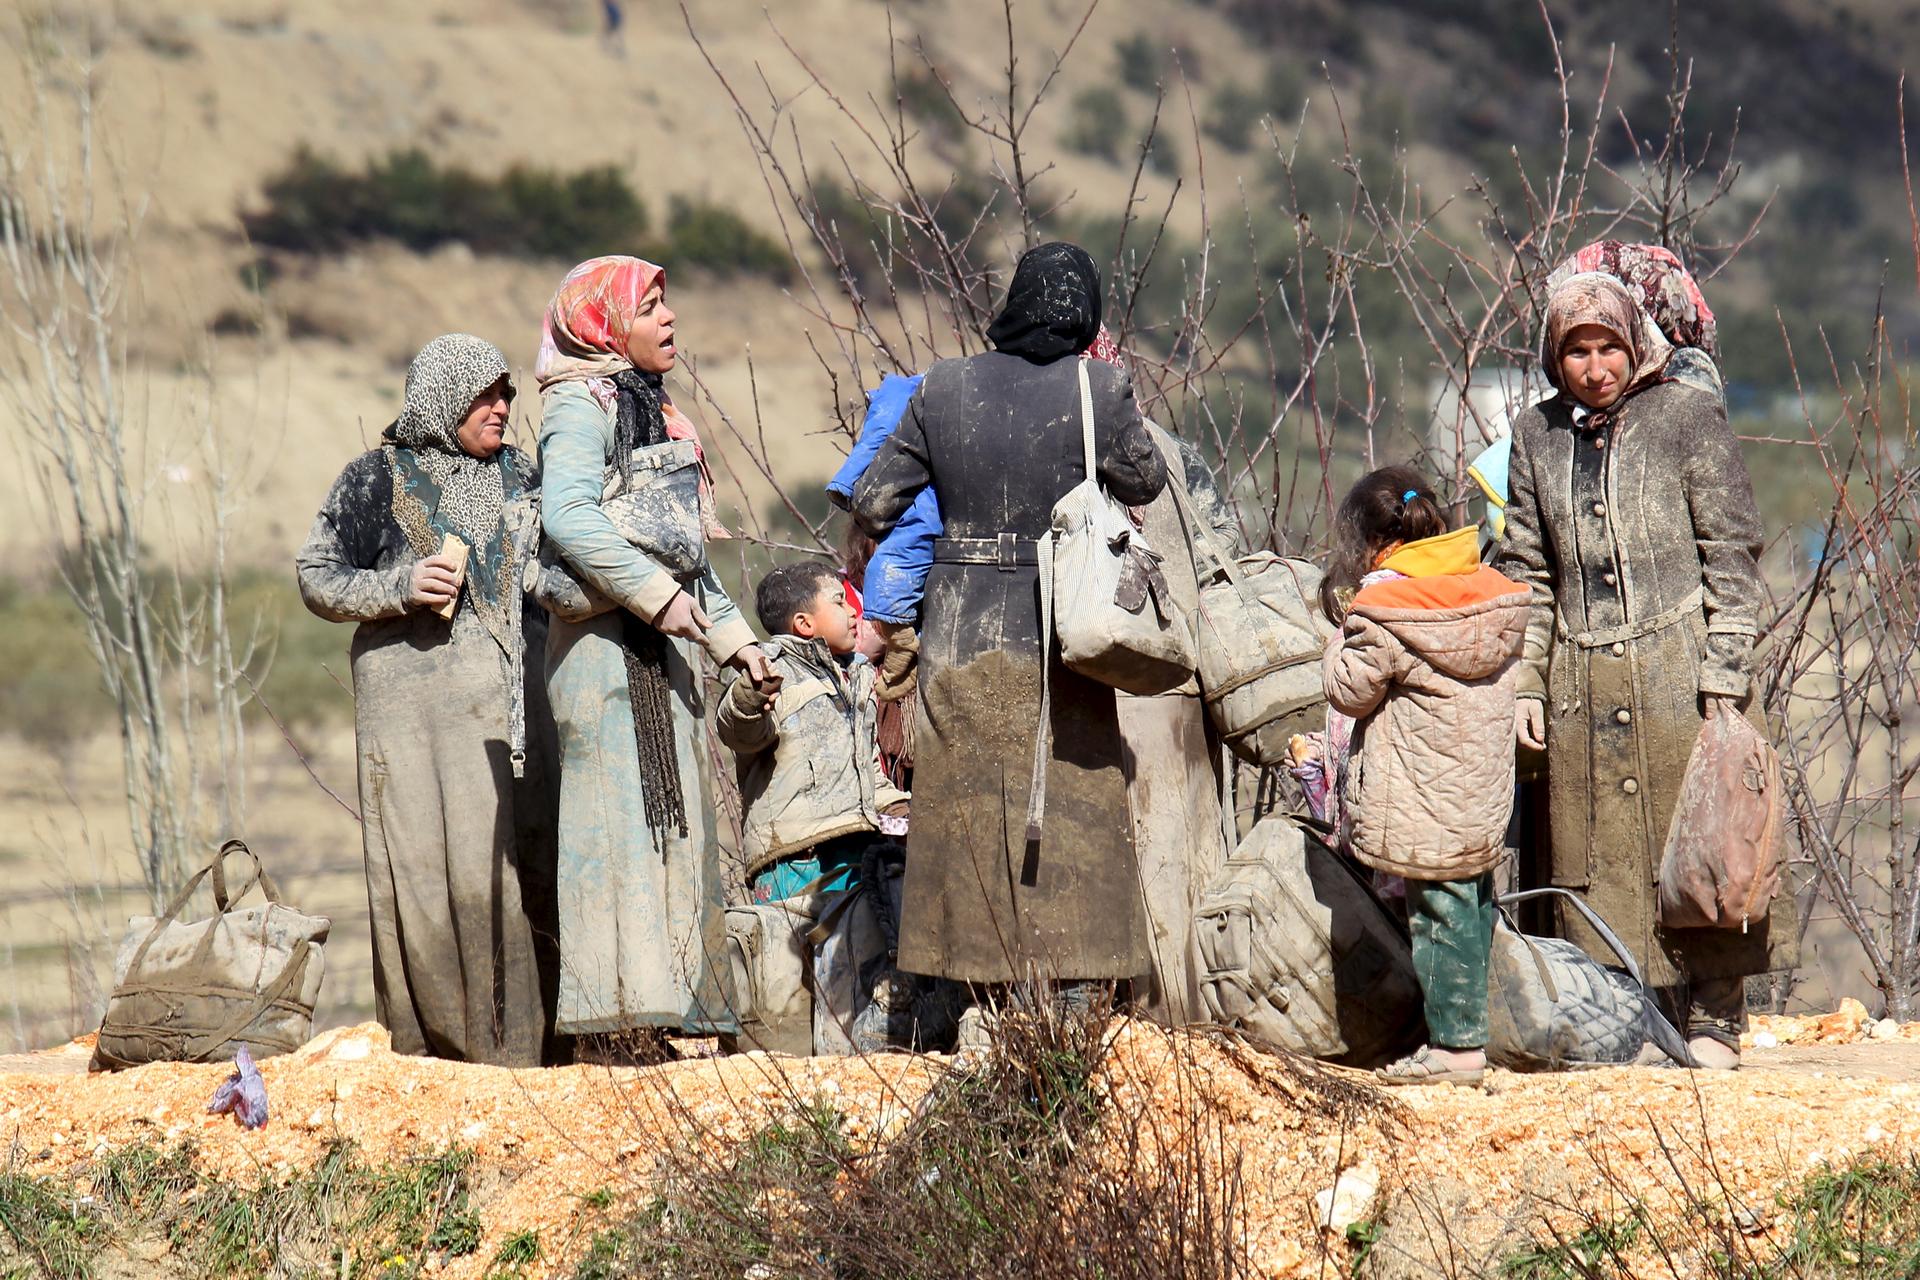 Internally displaced people, wait as they are stuck in the town of Khirbet Al-Joz, in Latakia countryside, waiting to get permission to cross into Turkey near the Syrian-Turkish border, Syria, February 7, 2016.